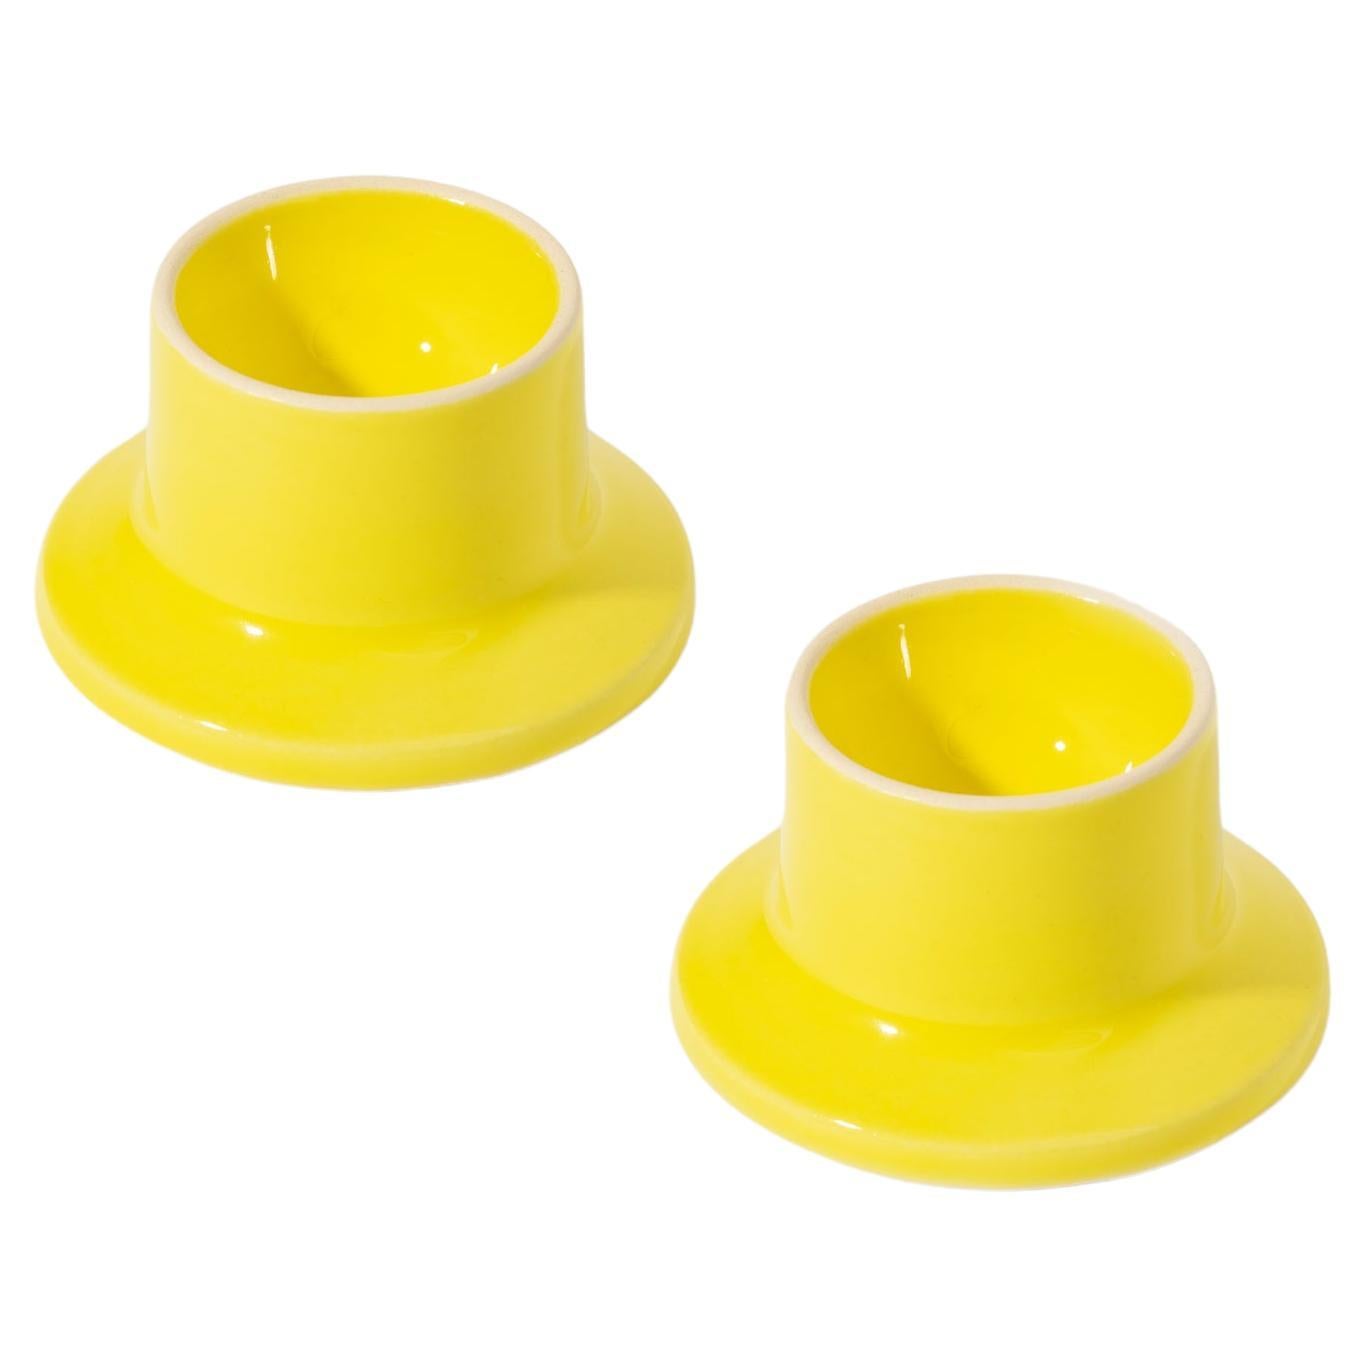 Egg holder / Yellow / set of 2 by Malwina Konopacka For Sale